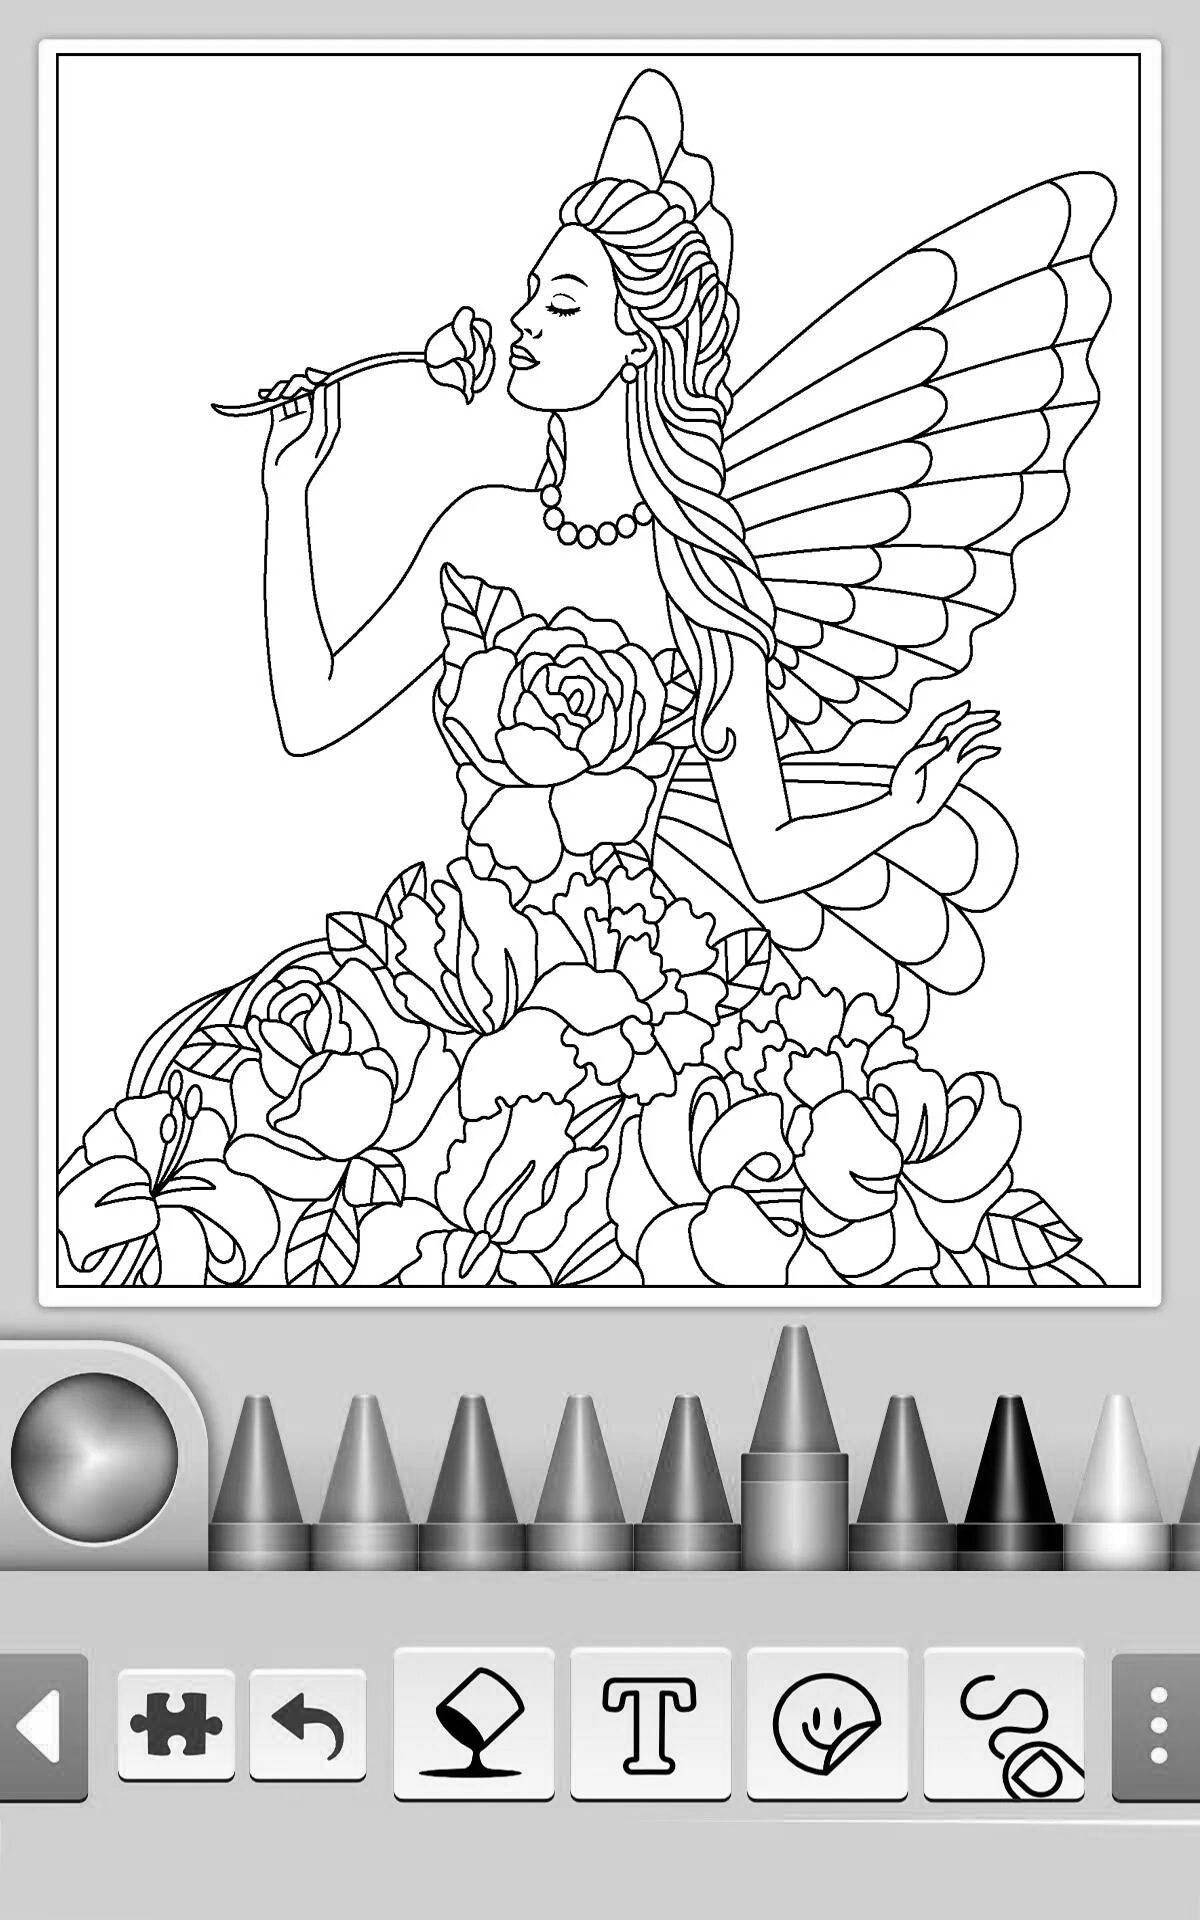 Animated play market coloring page